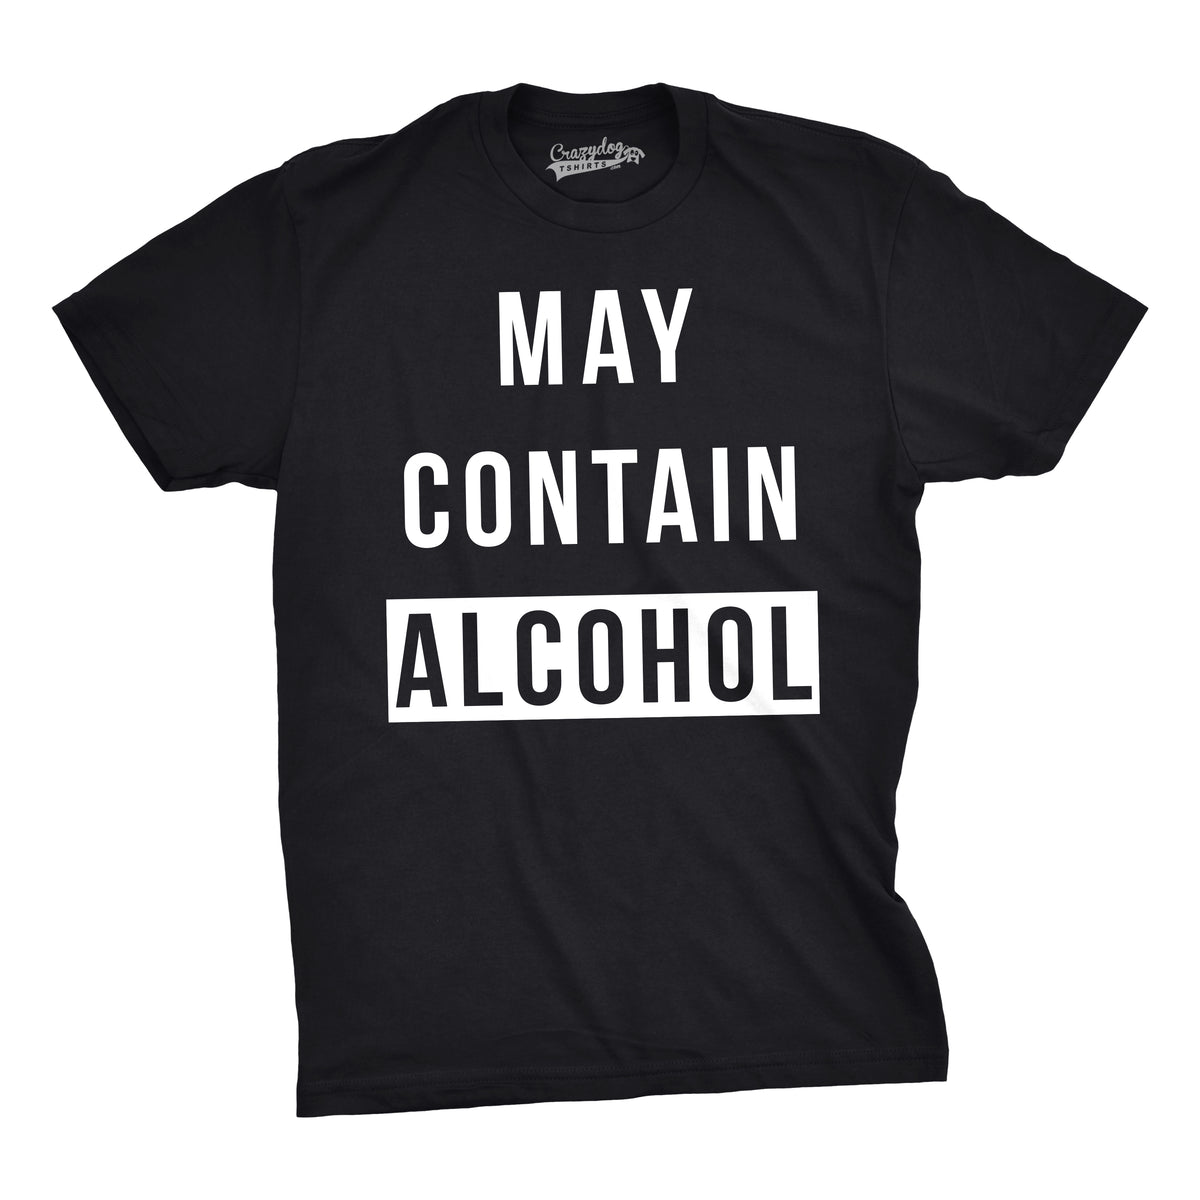 Funny Black May Contain Alcohol Mens T Shirt Nerdy Drinking Tee